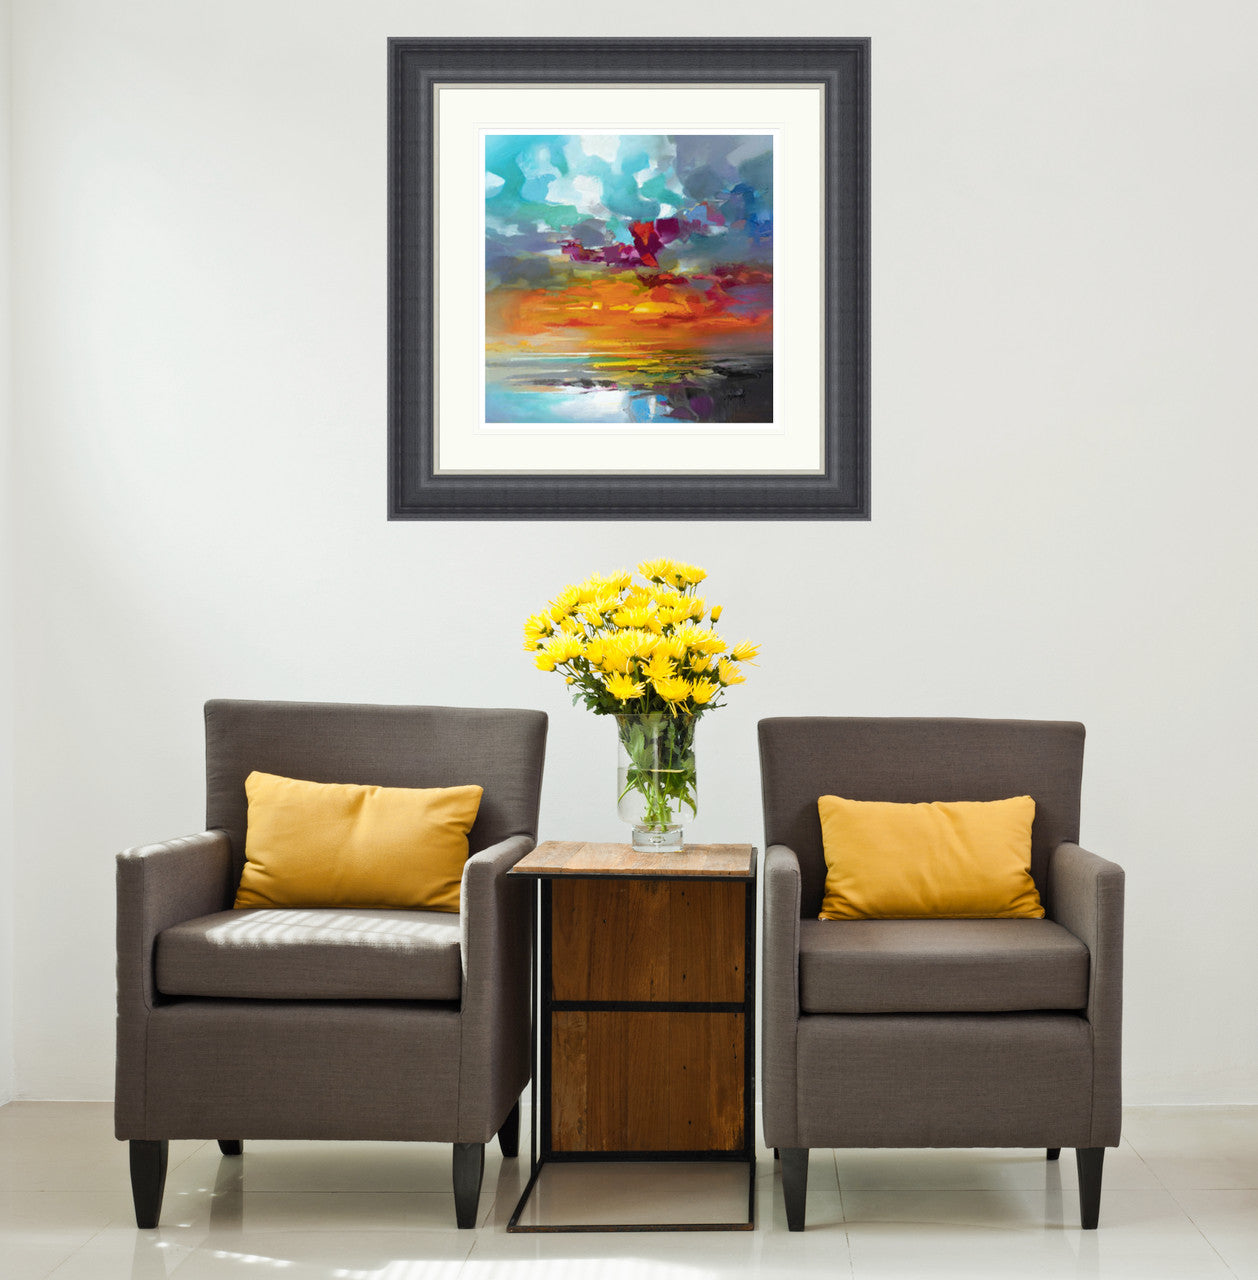 Optimist Sunset (Signed & Numbered Limited Edition) by Scott Naismith